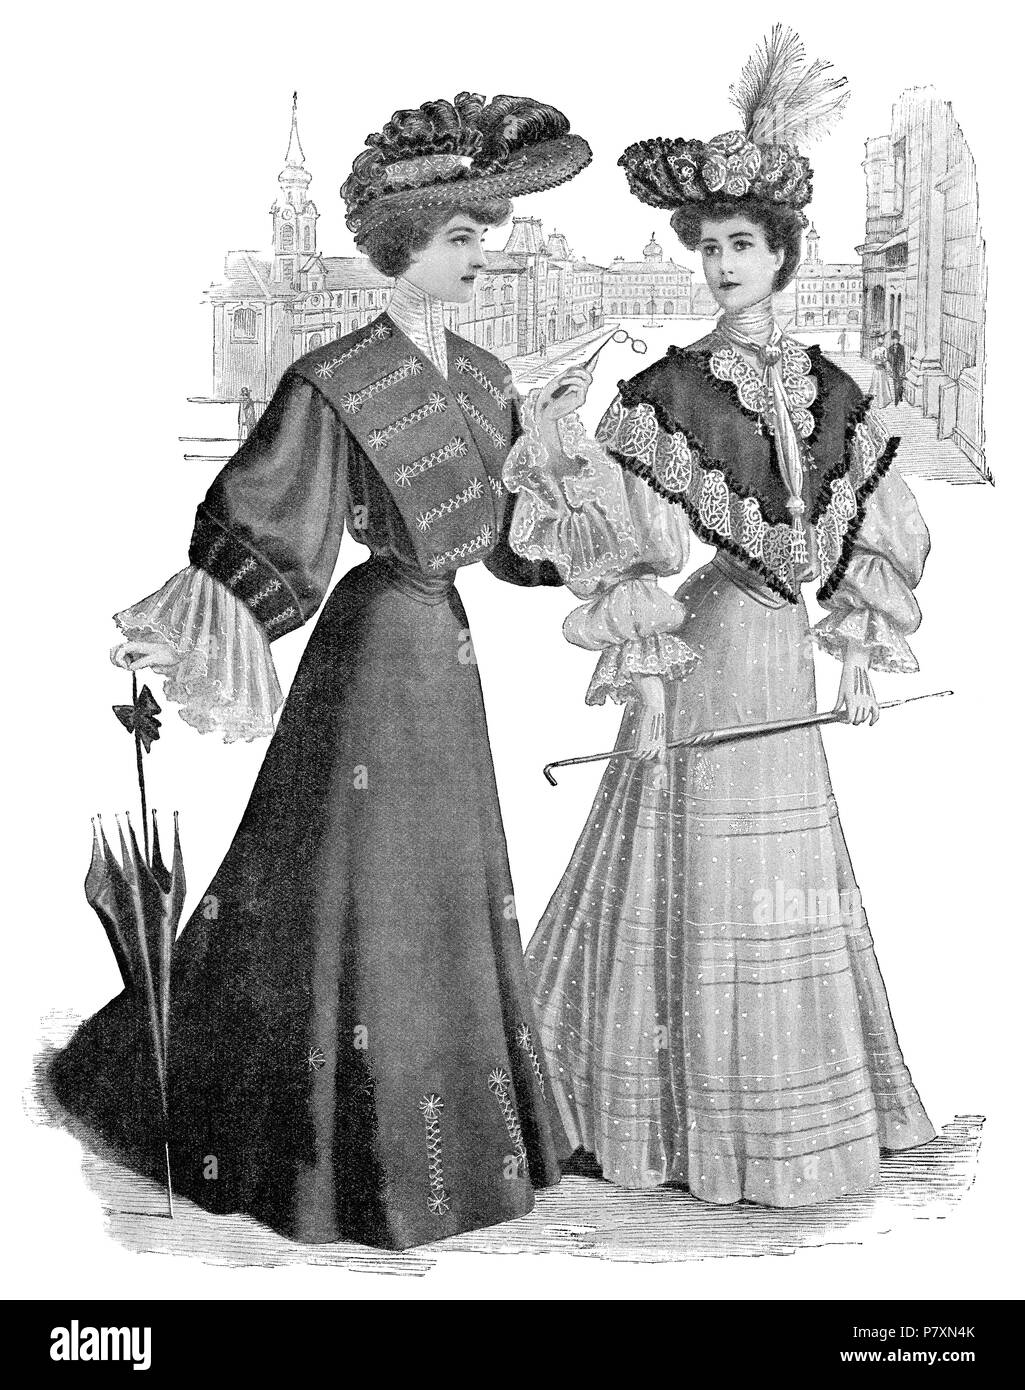 1904 vintage fashion illustration of two Edwardian ladies in day dresses. From The Girl's Own Paper, 30th July 1904. Stock Photo